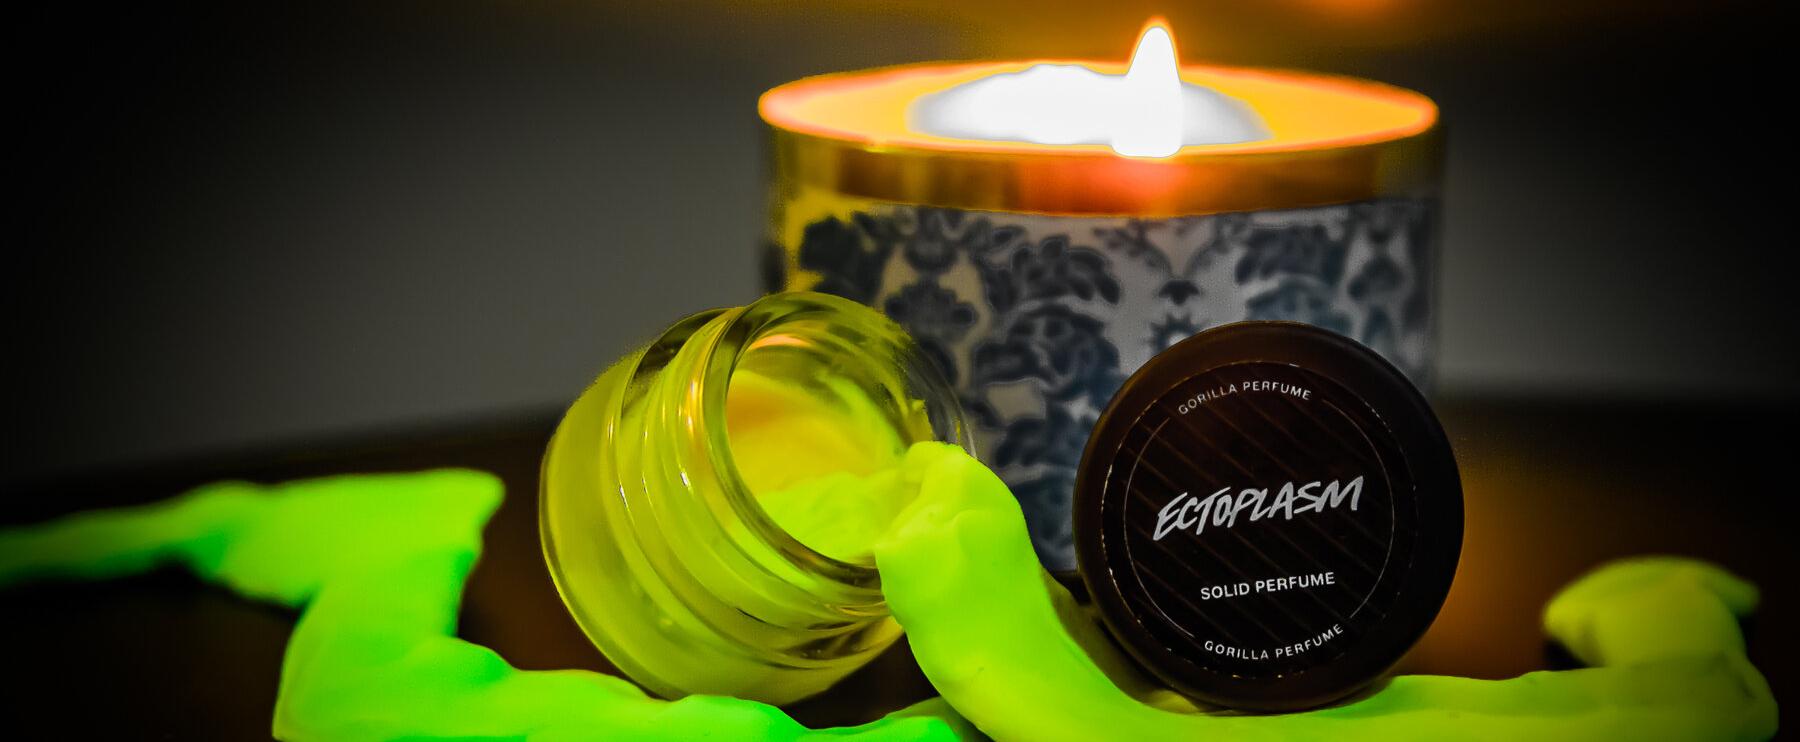 Lush Ectoplasm - Halloween Limited Edition from 2018